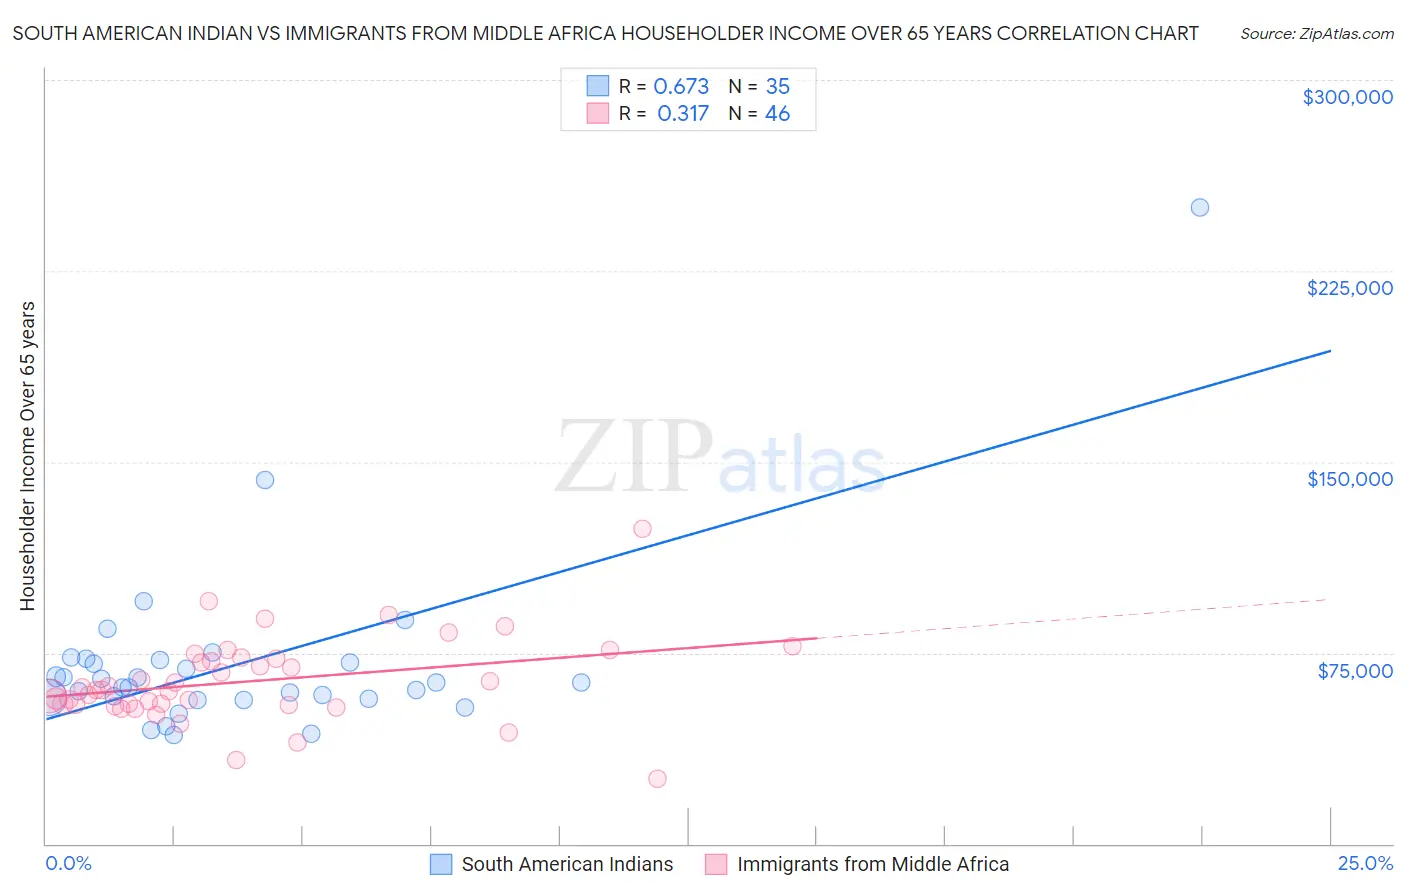 South American Indian vs Immigrants from Middle Africa Householder Income Over 65 years